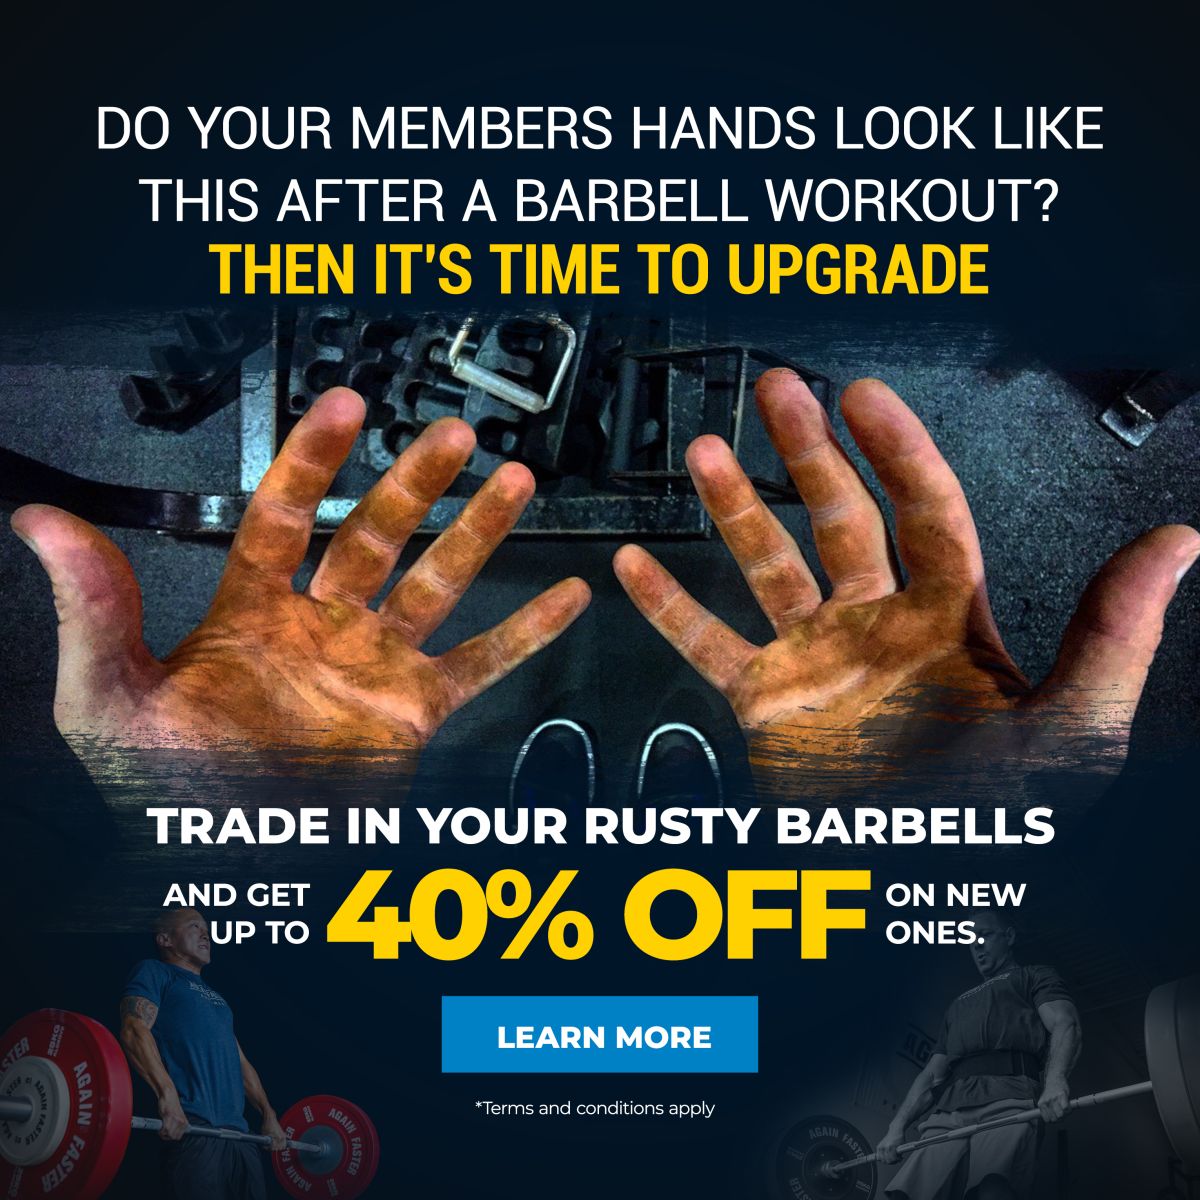 TRADE IN BARBELL 